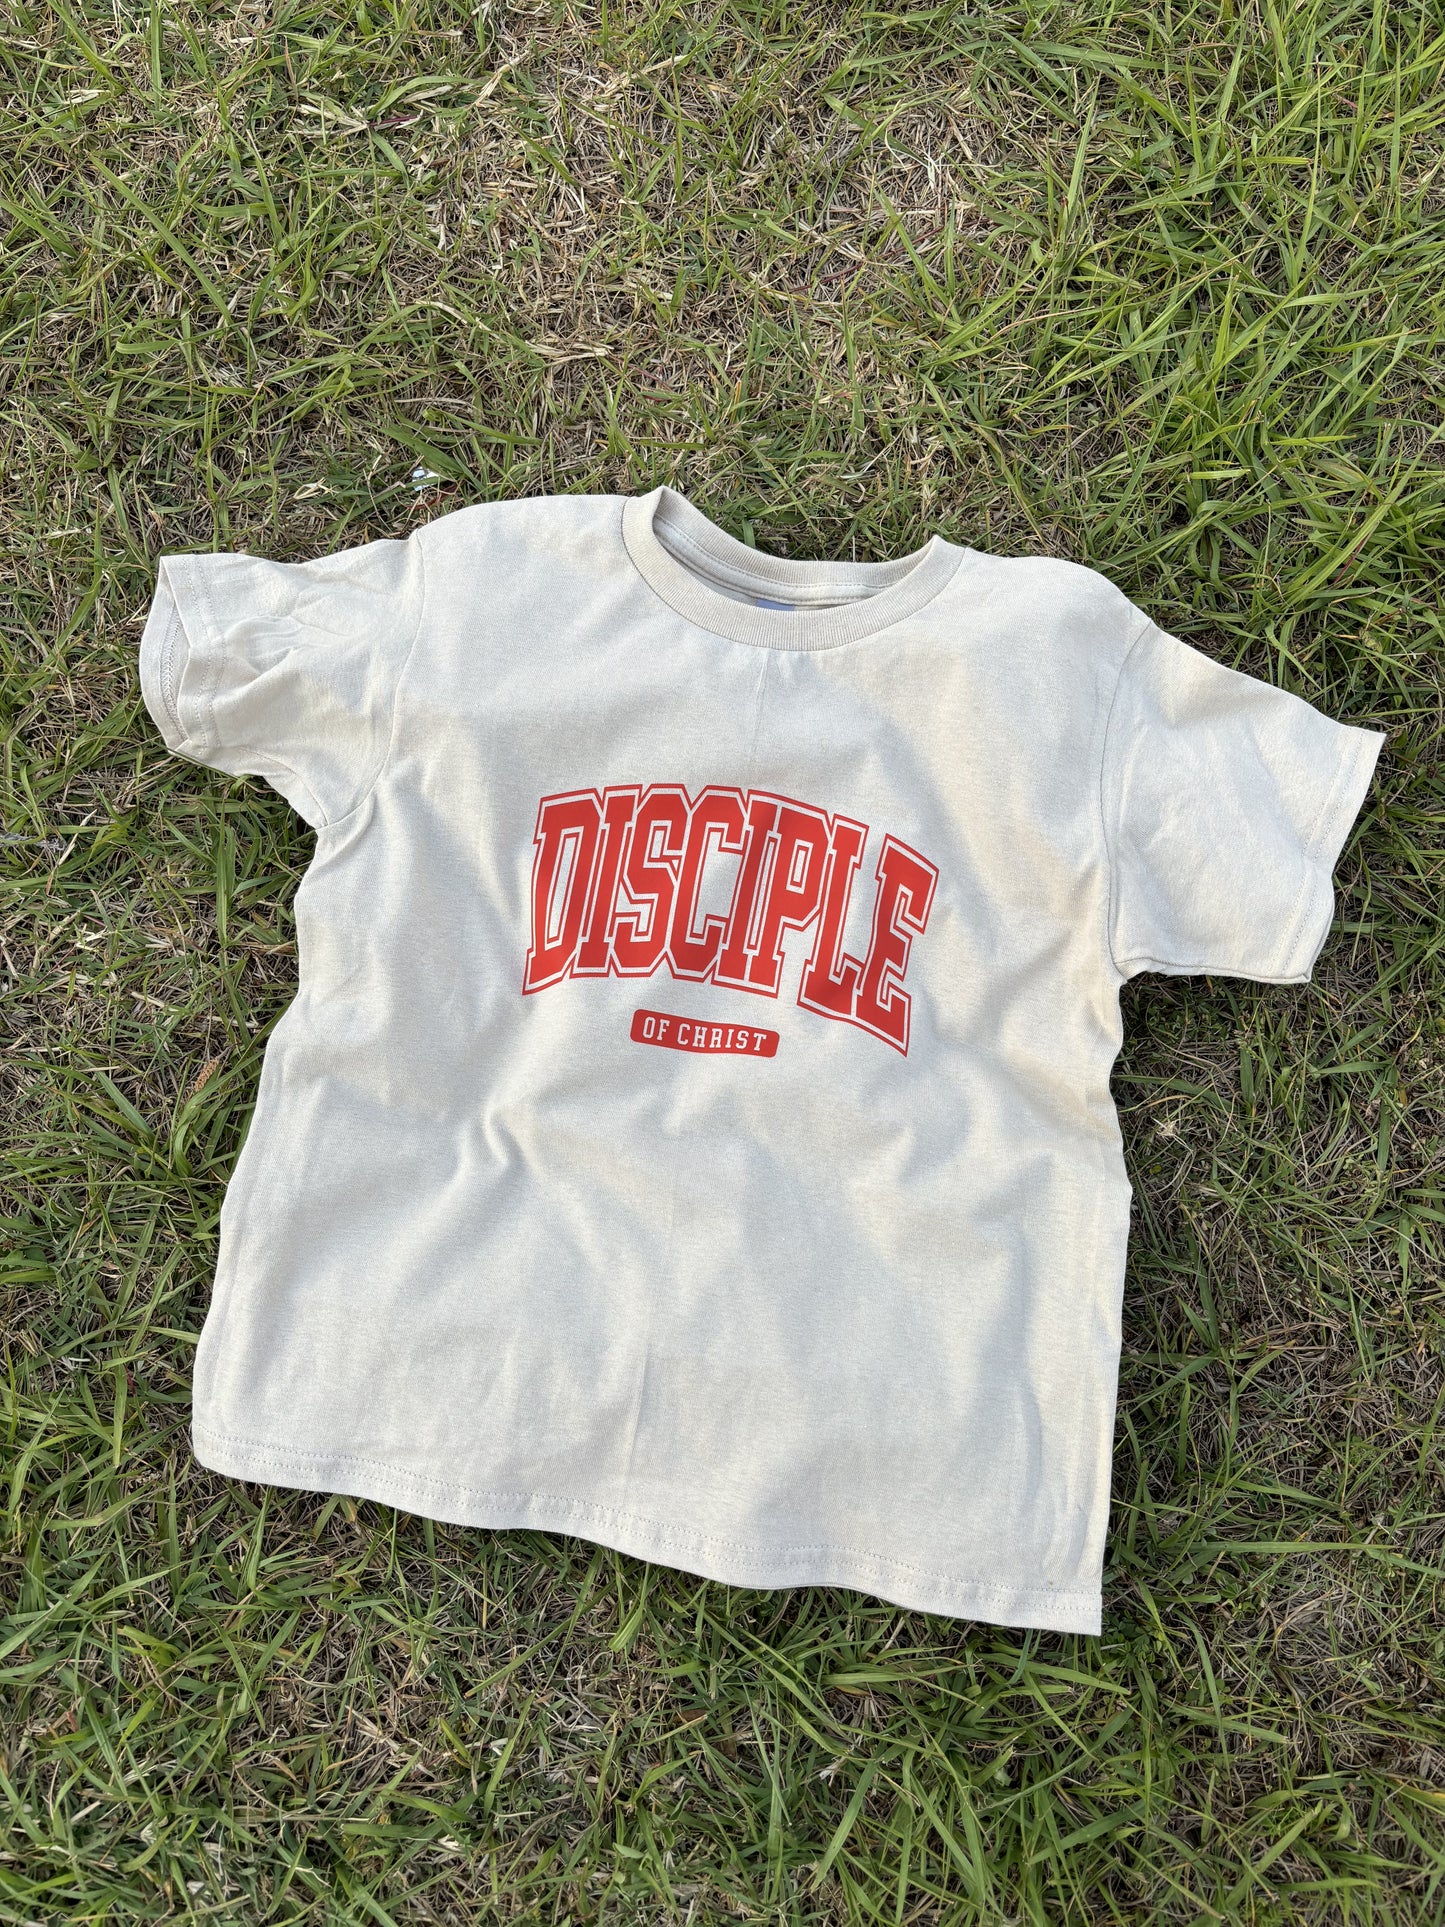 Disciple Of Christ - Adult T Shirt